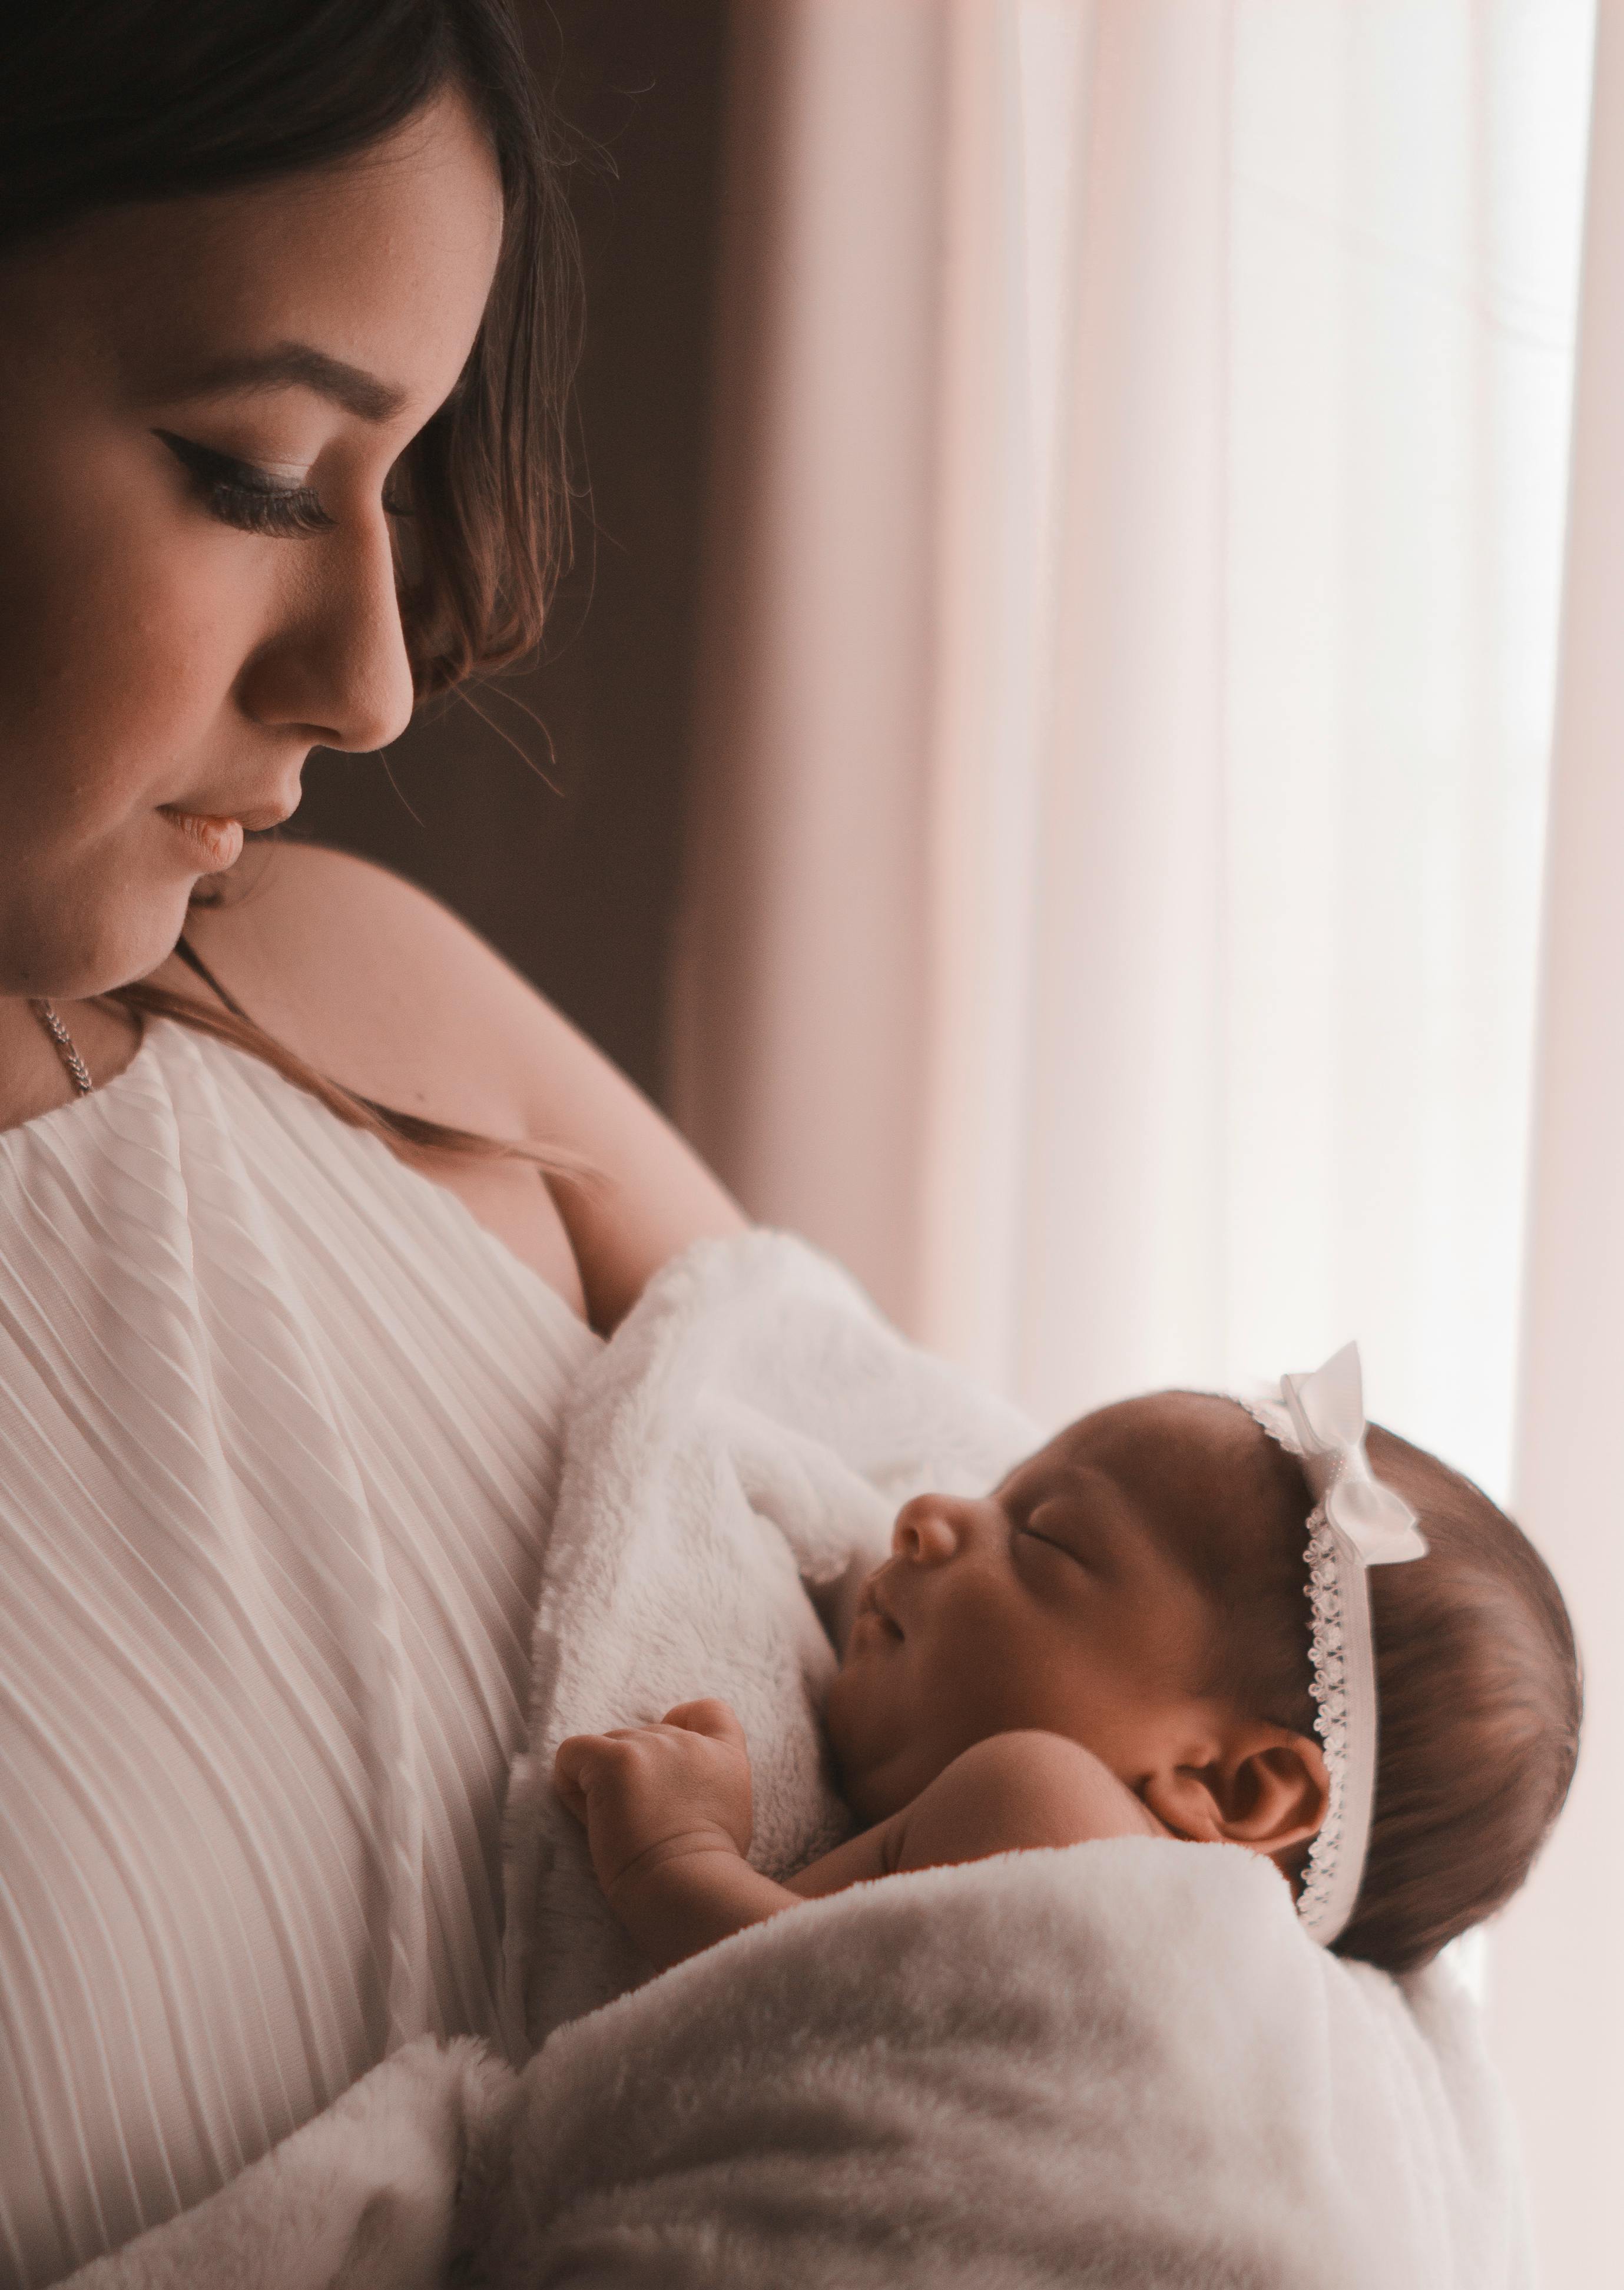 A mother holding her baby | Source: Pexels